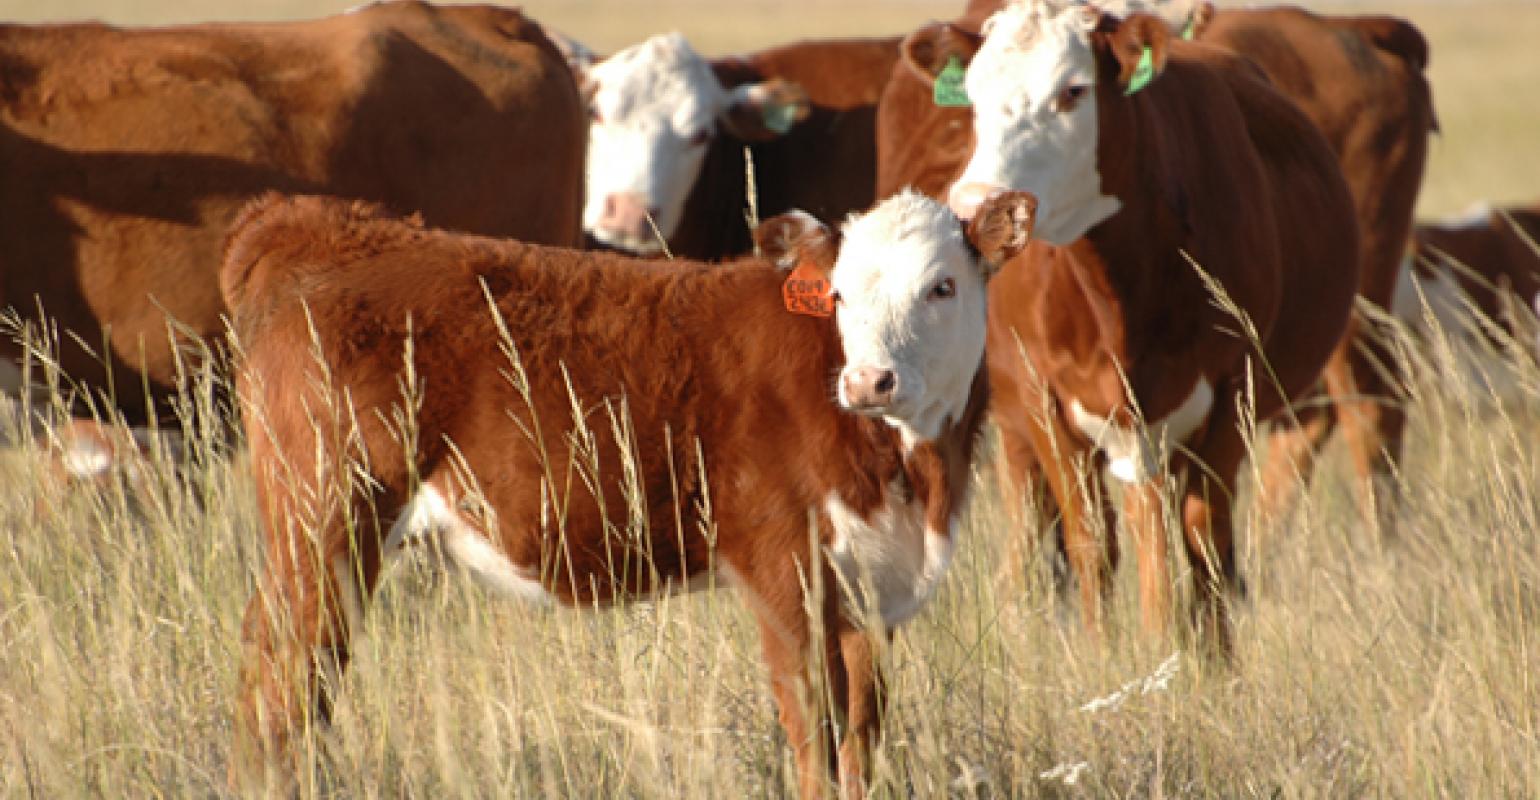 Cattle Herds Are Shrinking And Intensifying Focus On Packer Capacity, Says Randy Blach With CattleFax